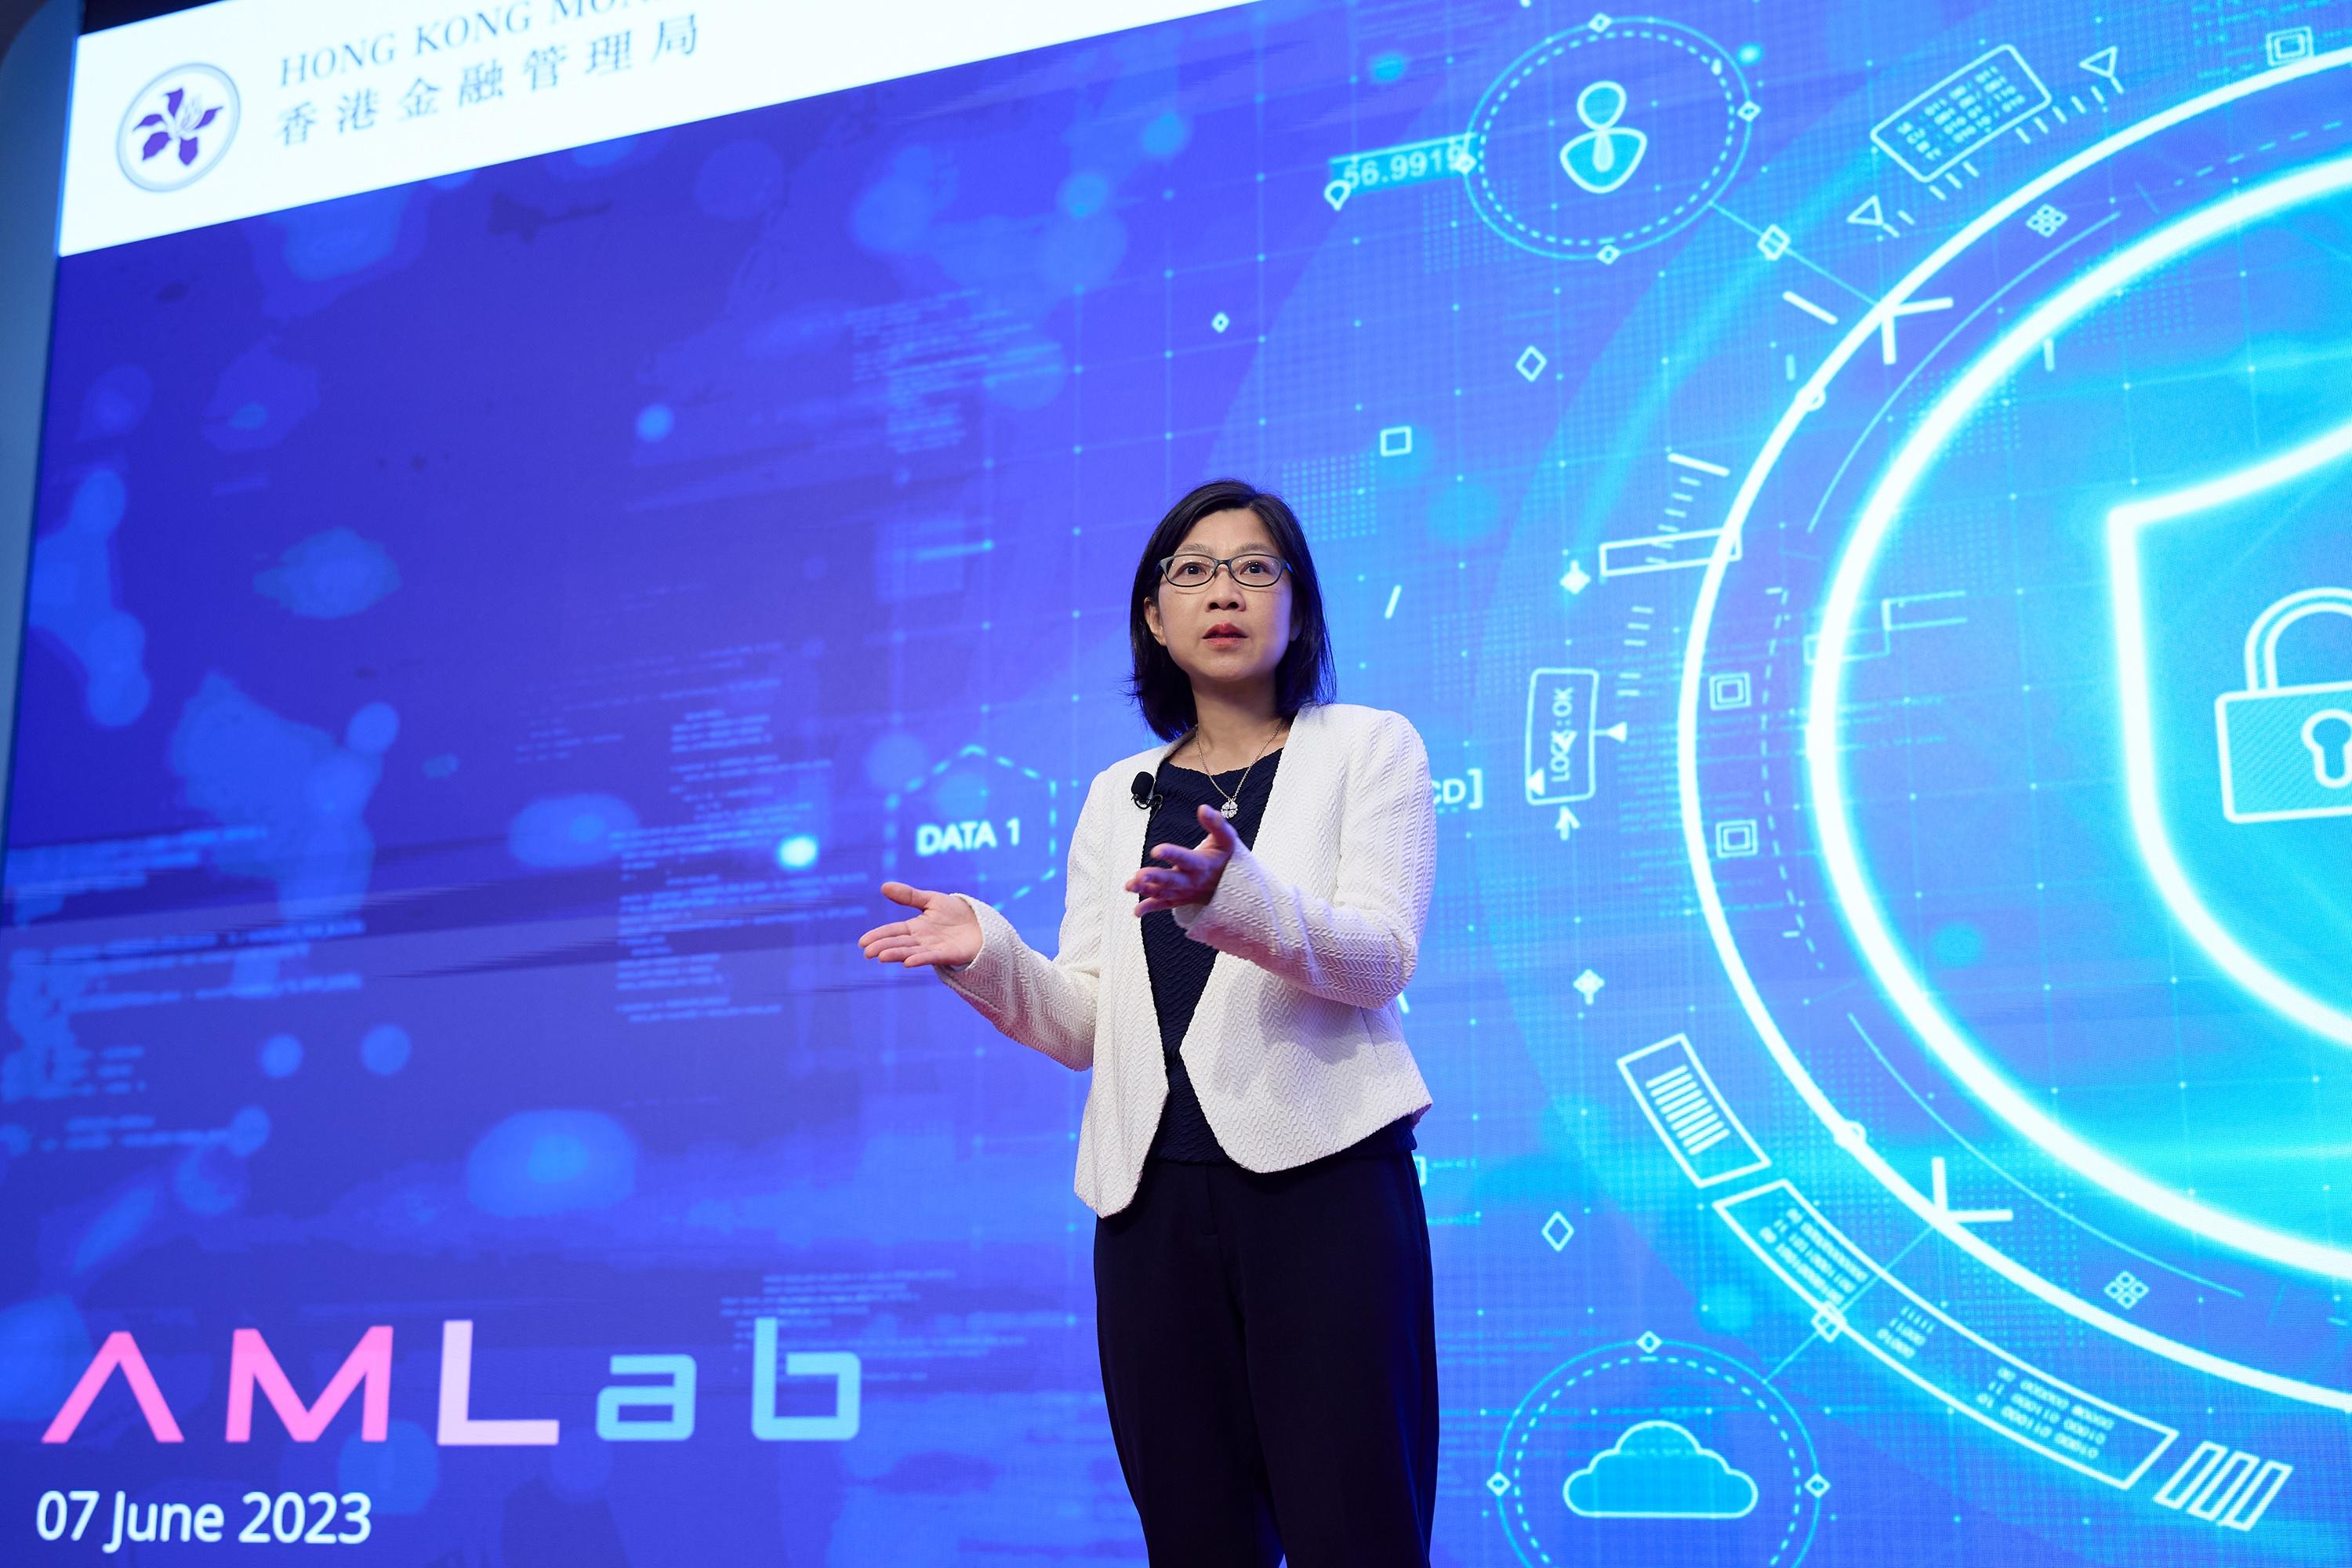 The Hong Kong Monetary Authority (HKMA) and Cyberport co-hosted the fourth Anti-Money Laundering Regtech Lab (AMLab 4) today (June 7), with support from Deloitte. Photo shows the Executive Director (Enforcement and AML) of the HKMA, Ms Carmen Chu, delivering remarks at AMLab 4.